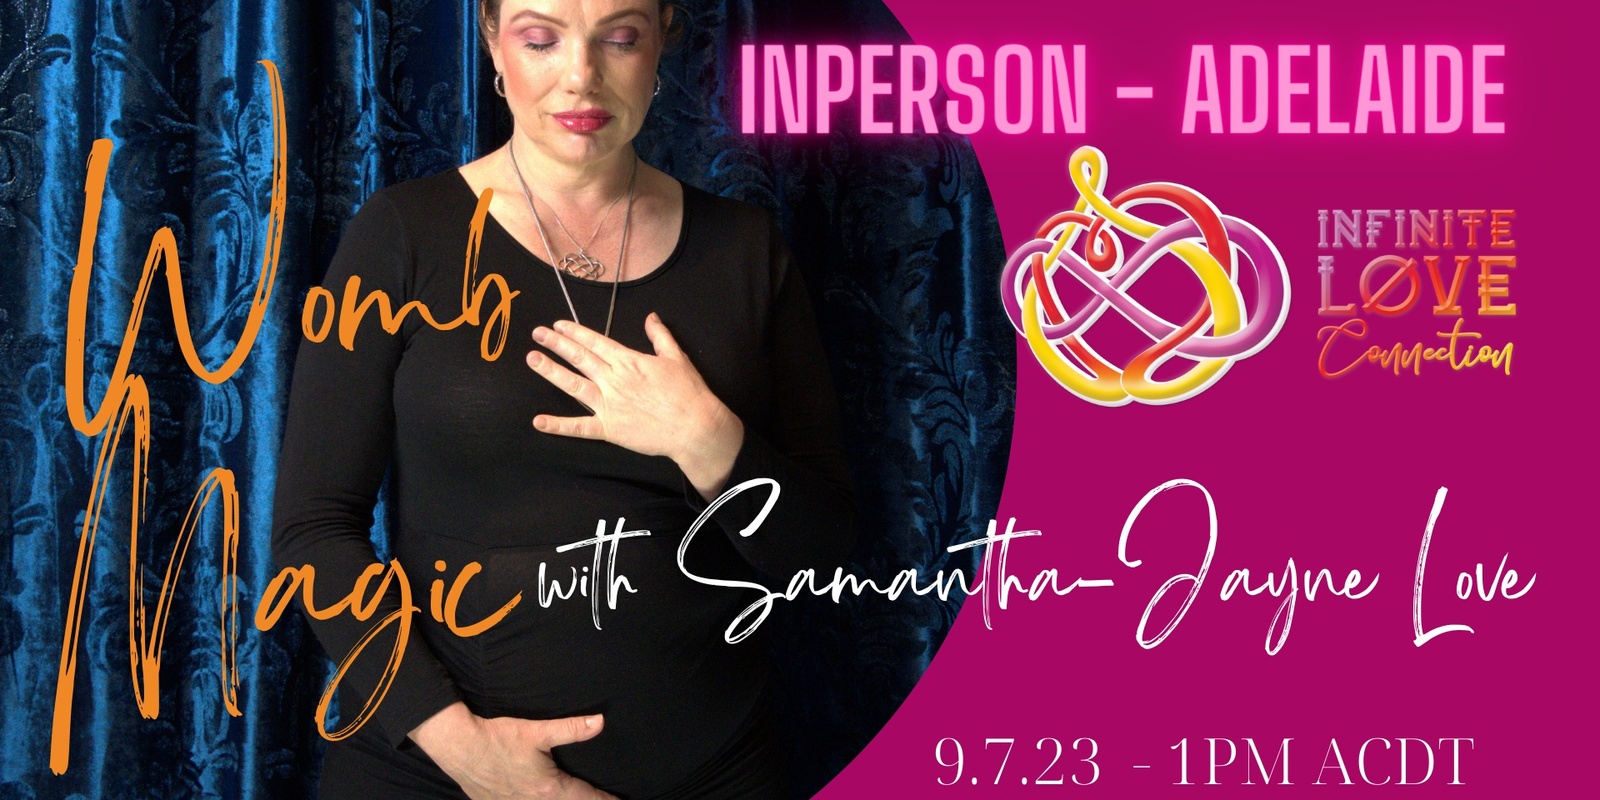 Banner image for WOMB MAGIC with Samantha-Jayne Love (In person - Adelaide)